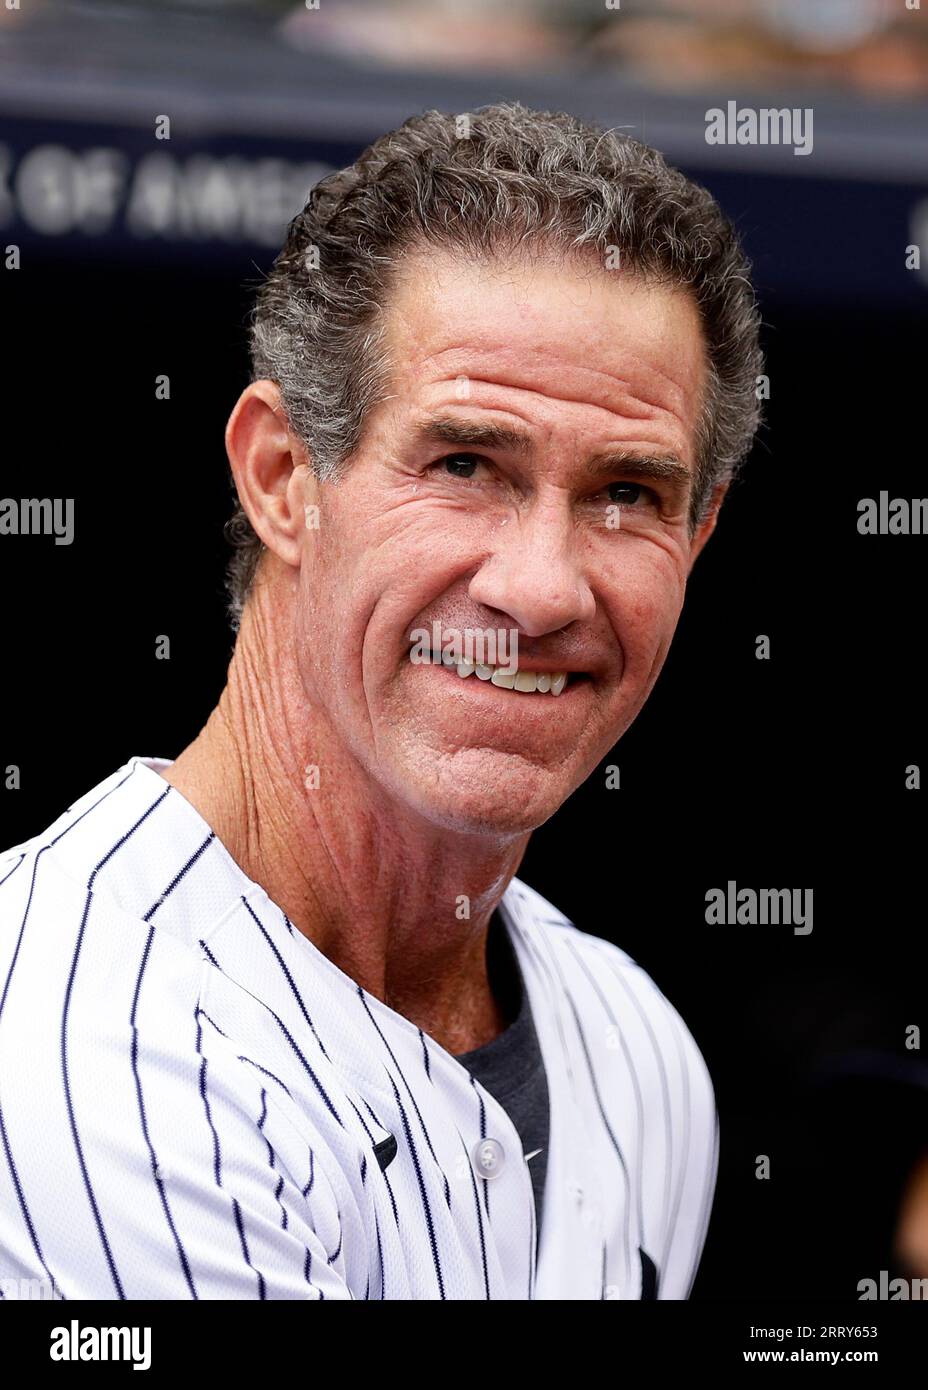 Paul O`Neill New York Yankees. Editorial Photo - Image of